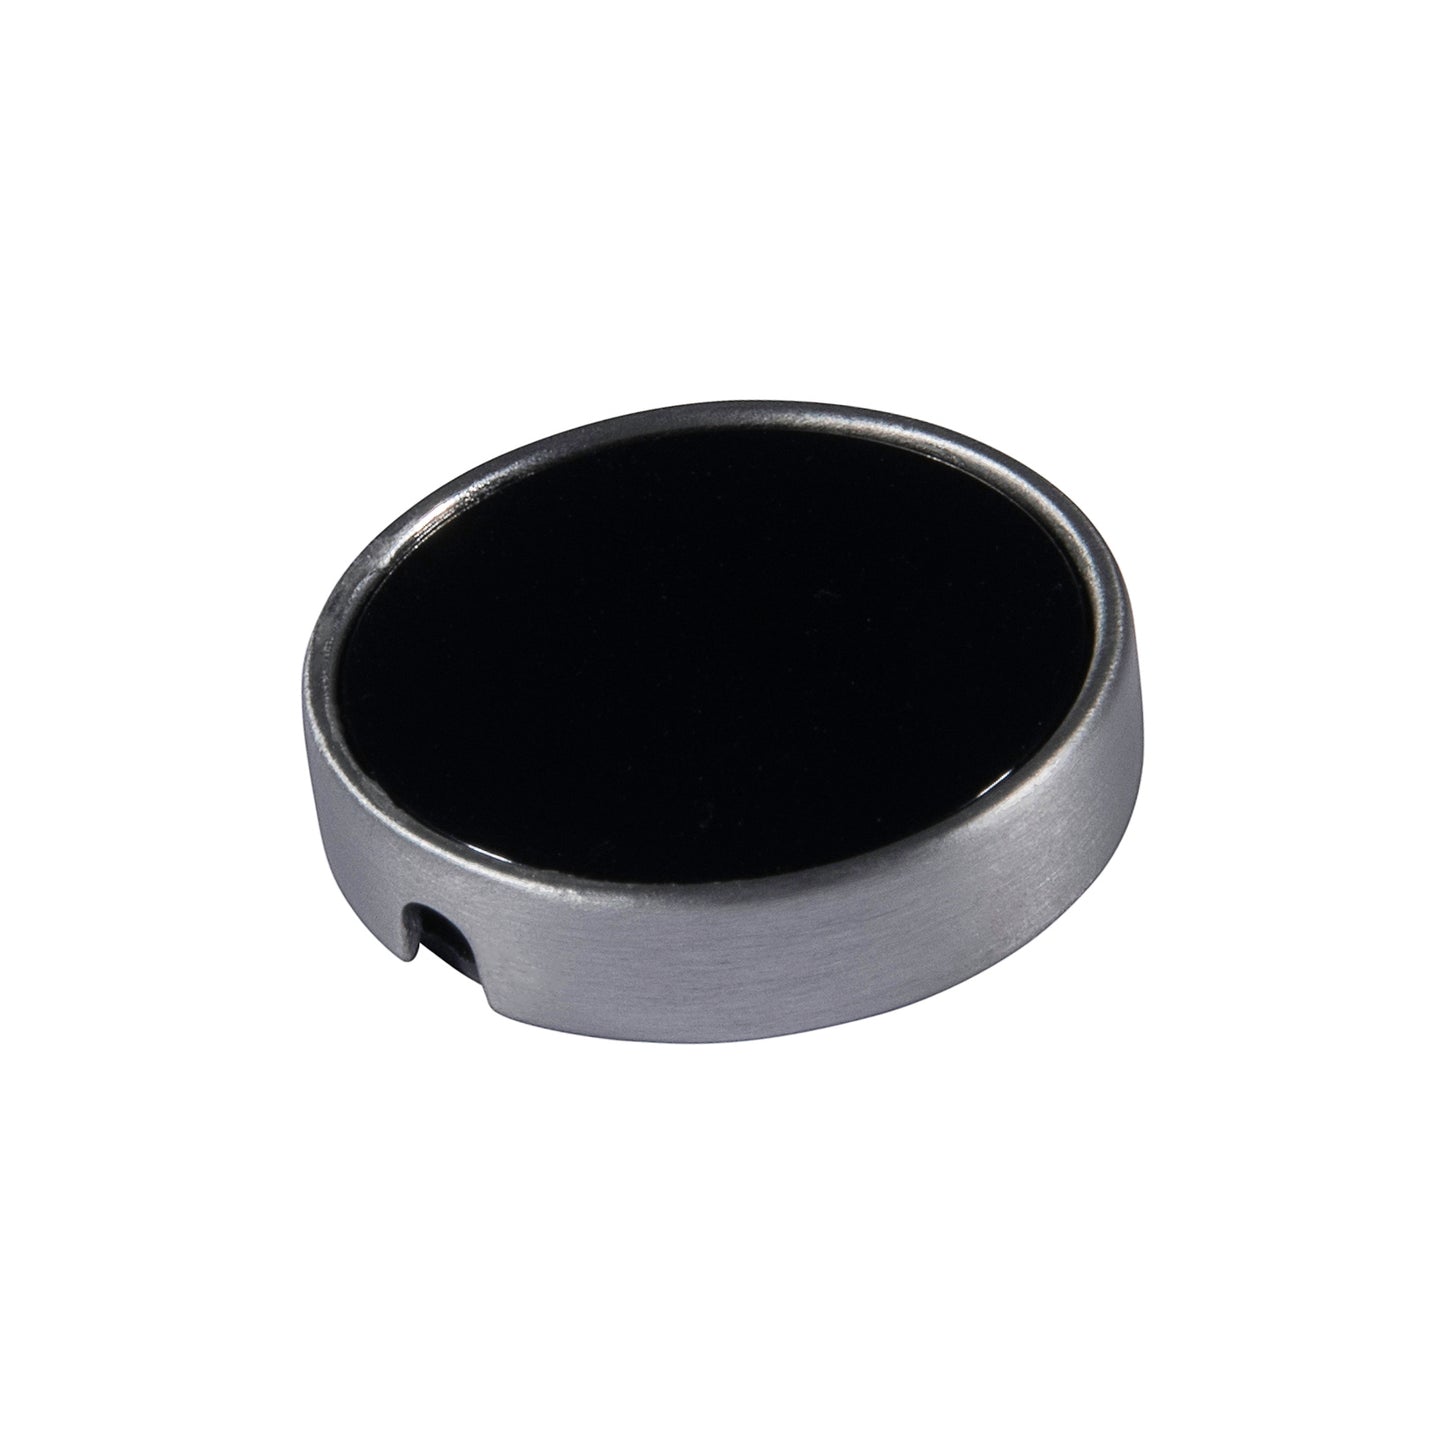 21mm button in brushed silver metal and black onyx